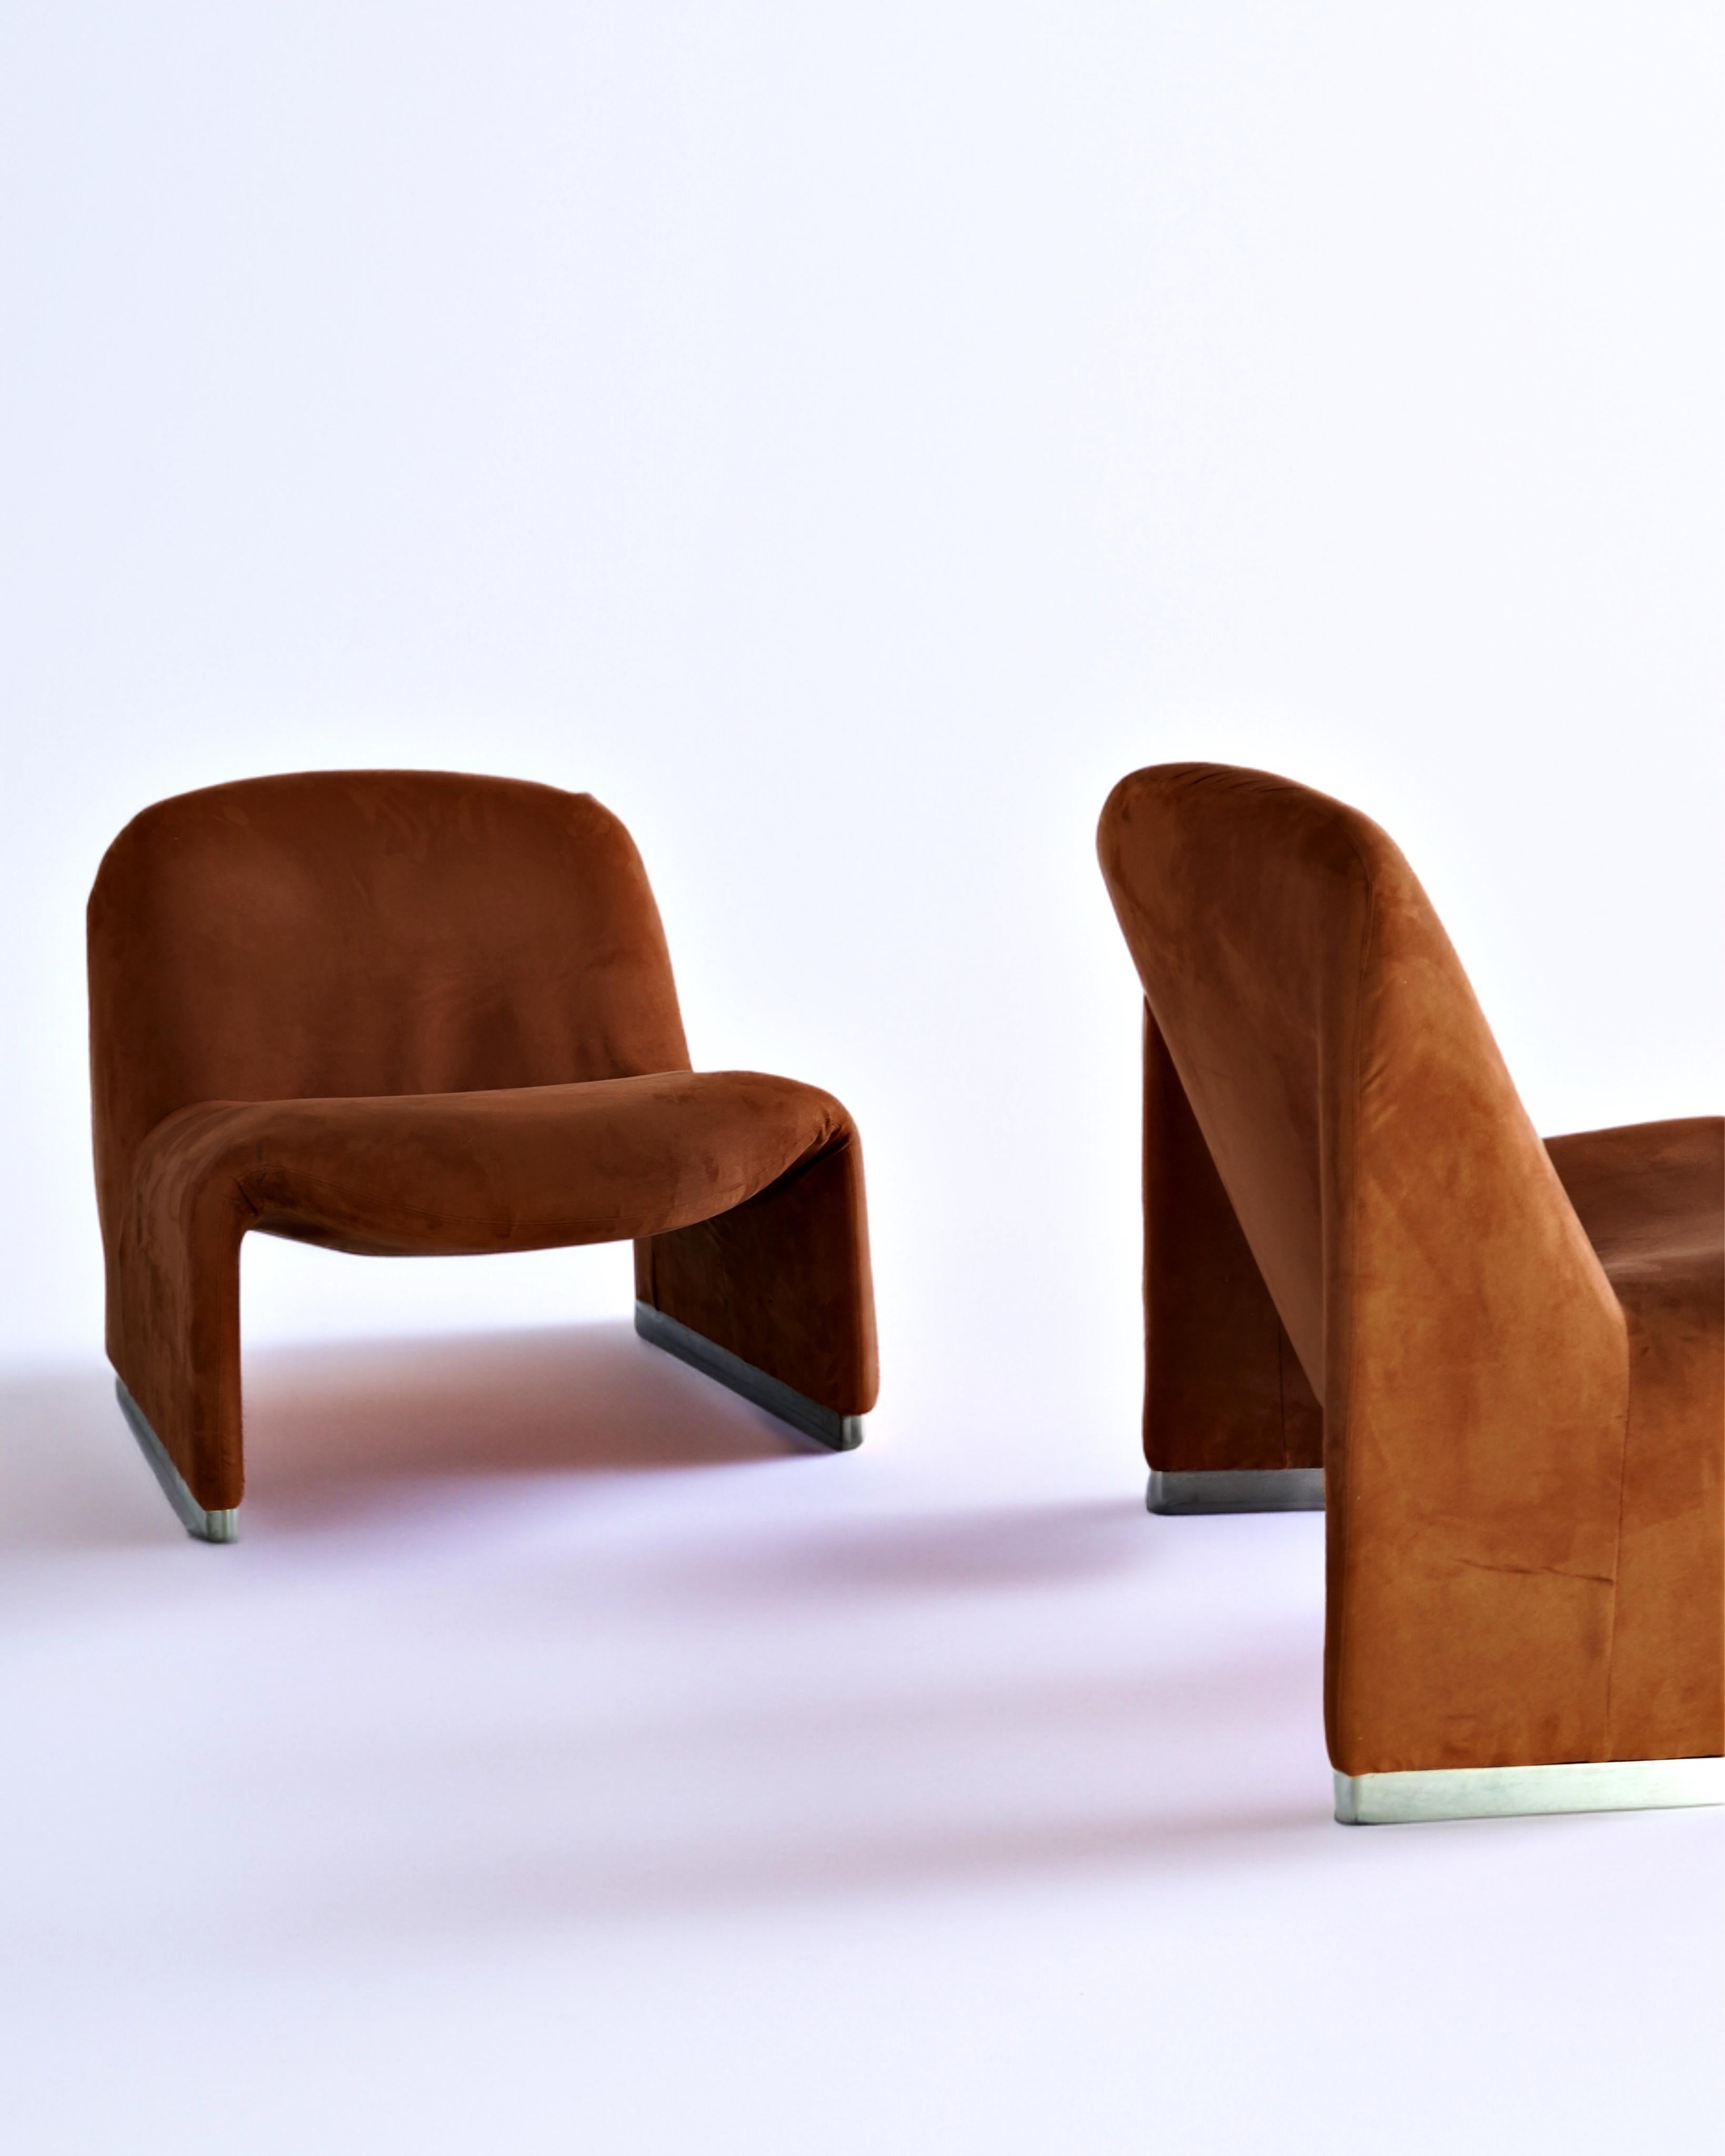 Classic design by Giancarlo Piretti for Artifort. The foam is situated directly on numerous elastic bands for a soothing and relaxing sit. Sitting on aluminum feet the subtle curves of the design fit into a multitude of environments with ease. These